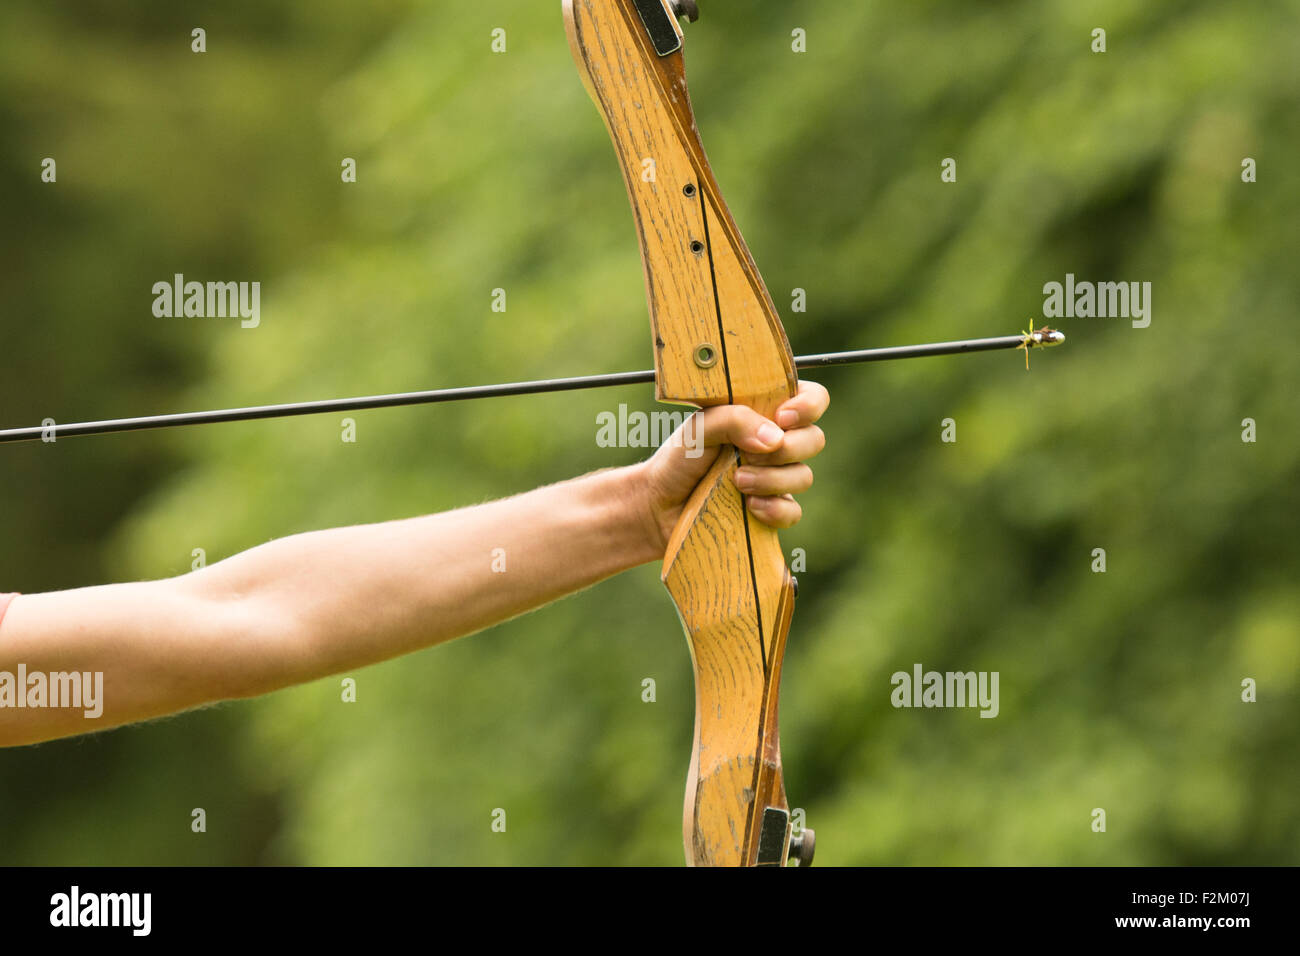 Arm holding Bow and Arrow ready to be loosed Stock Photo